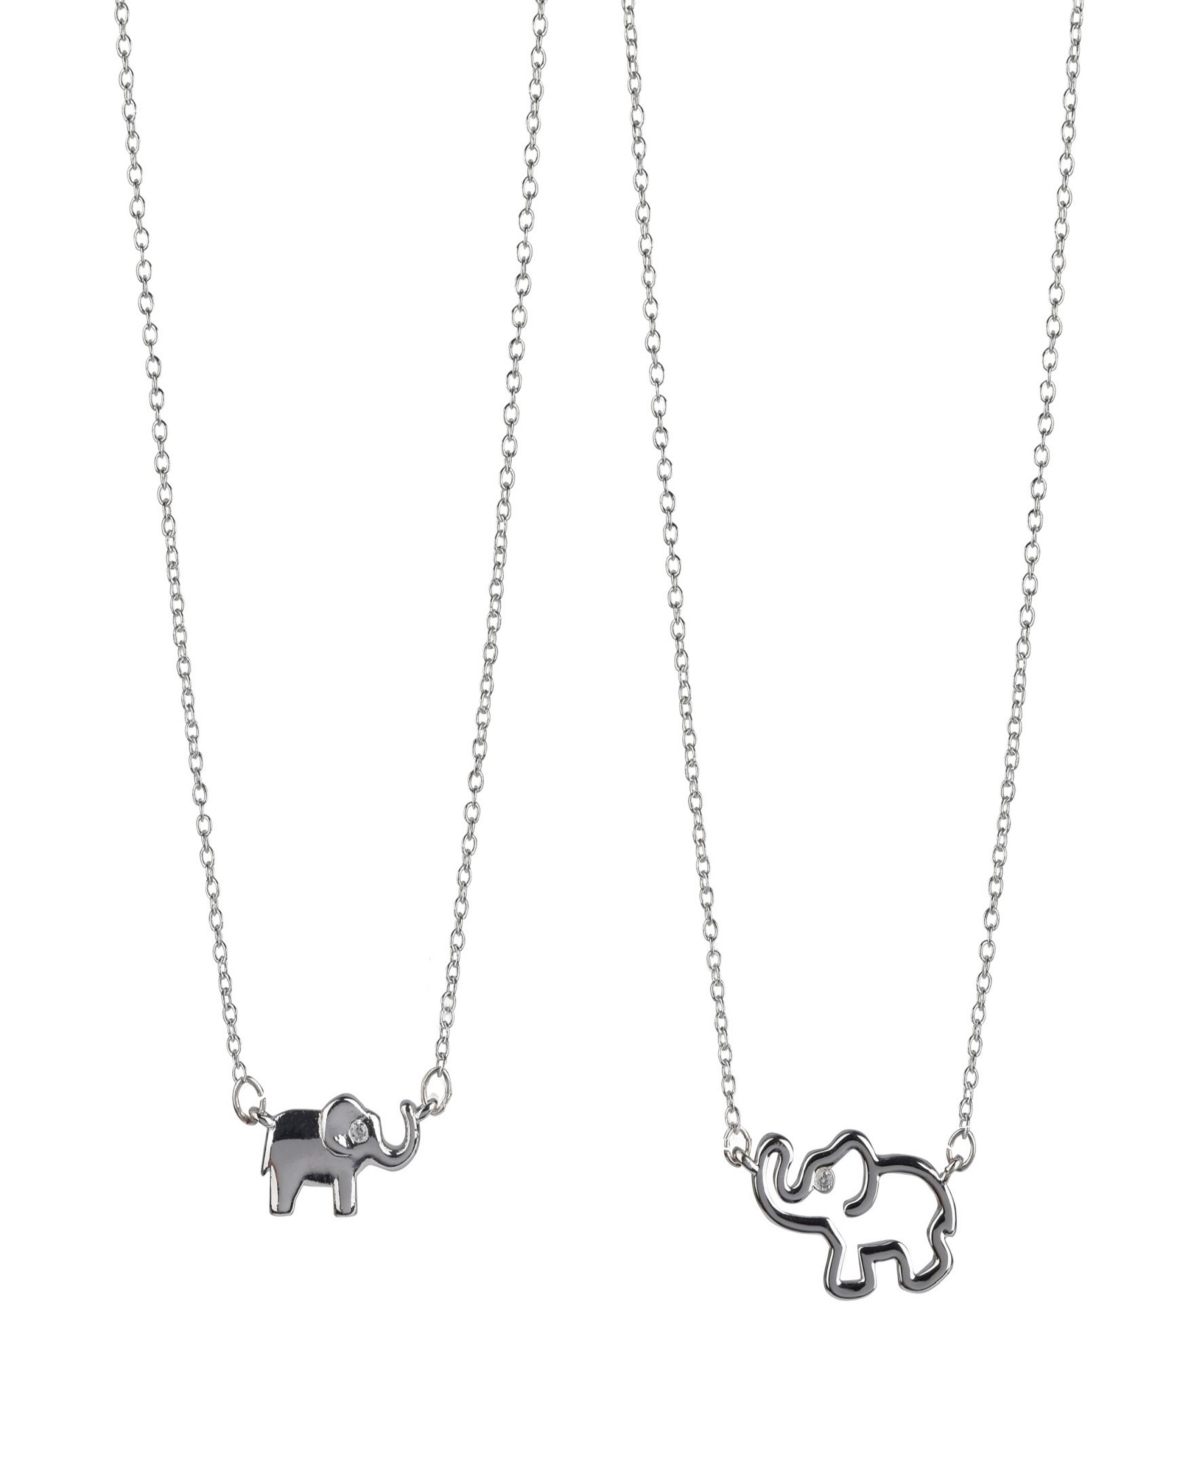 Fao Schwarz Fine Silver Plated Elephant Pendant Mommy and Me Necklace Set, 2 Piece